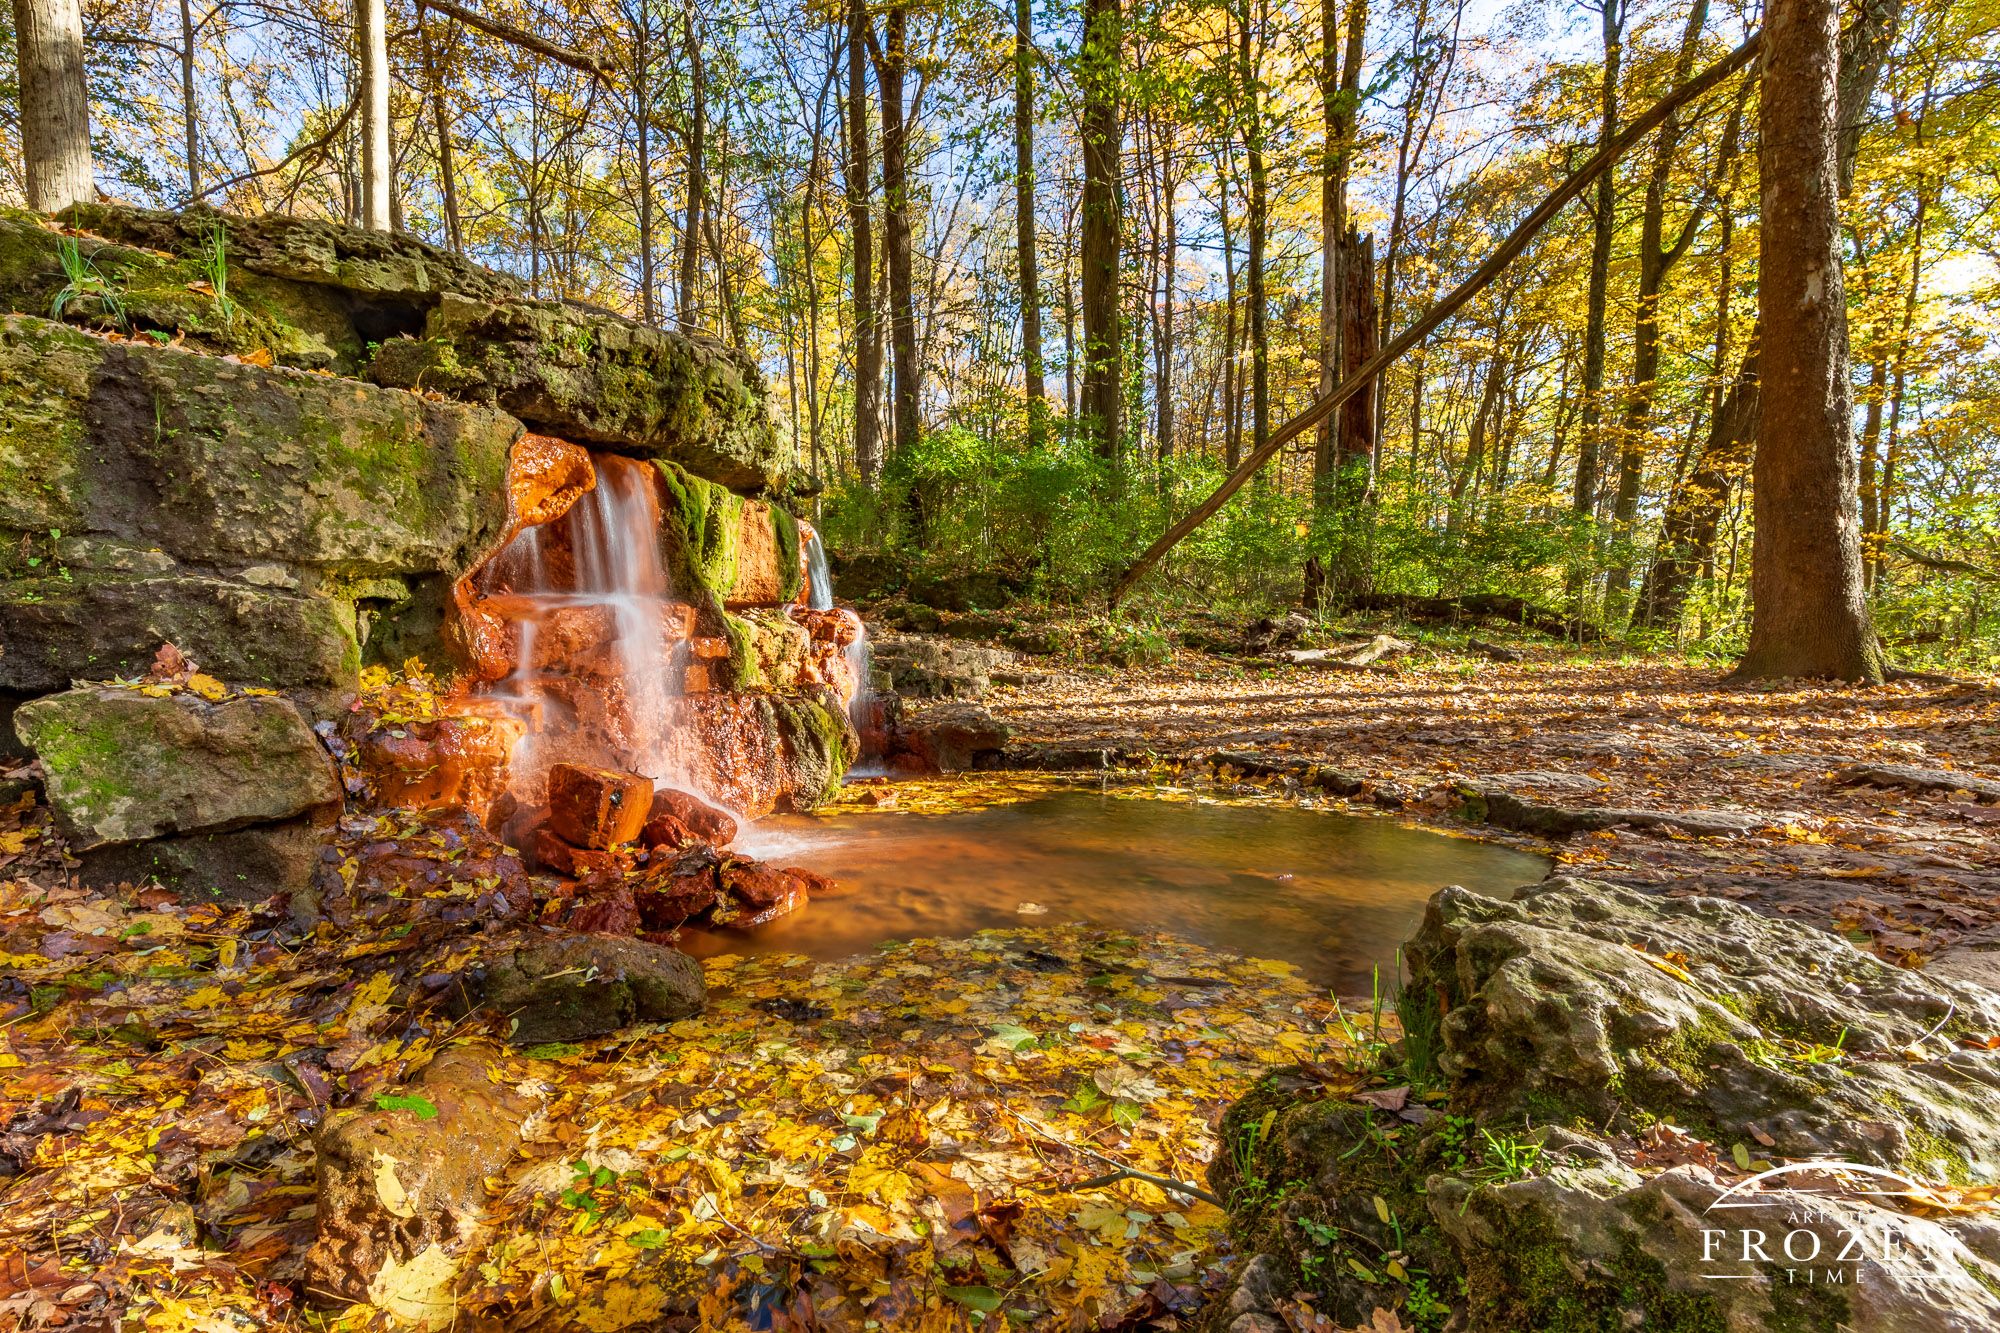 The Yellow Springs of Glen Helen Nature Preserve is a small dependable waterfall, where on this fall day holds golden Sugar Maple leaves basking in the evening lightch the evening sun warmly illuminated, thereby creating this colorful scene.